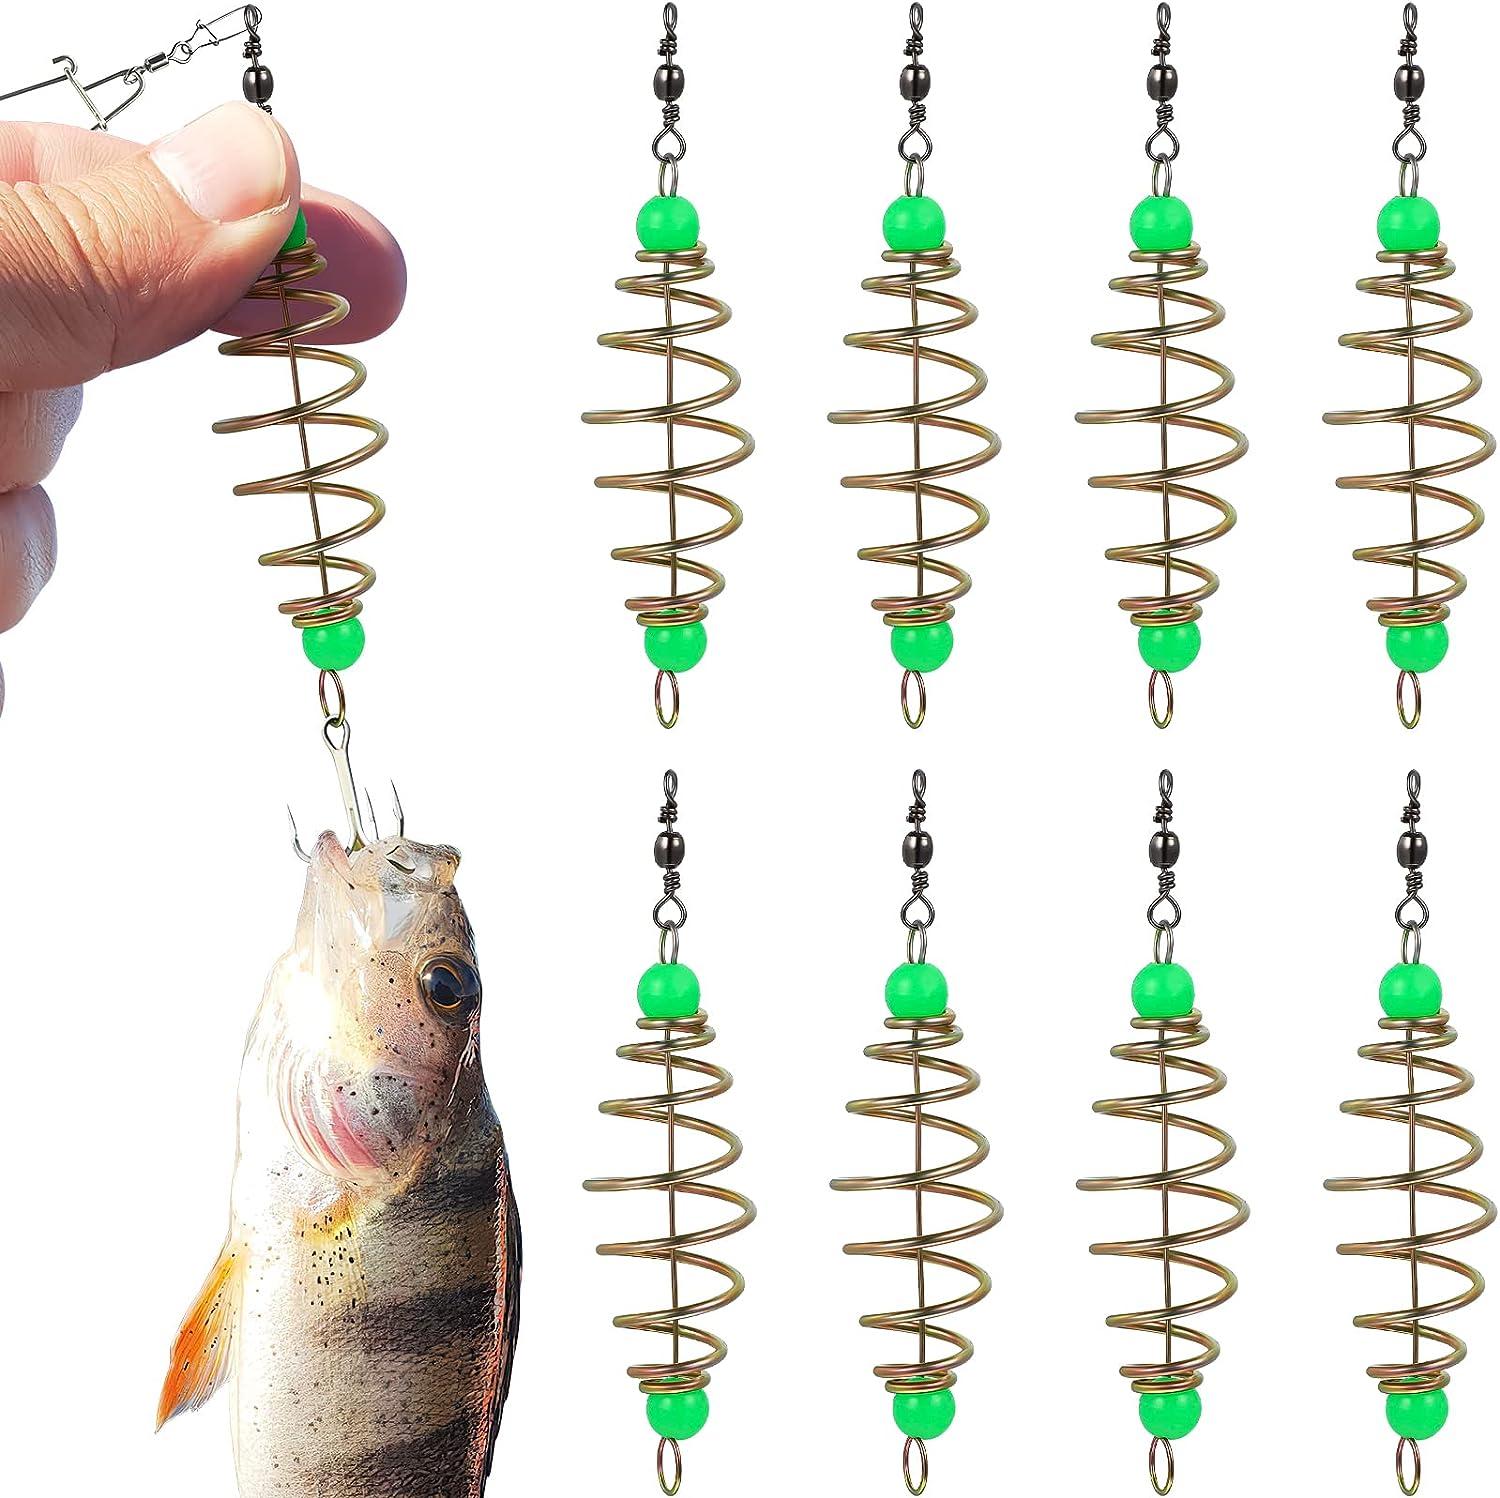 New Fishing Bait Lures Cage Stainless Steel Bait Trap Basket Feeder Bracket  Fishing Tools 9 Sizes Bait Cages For Perch And Carp - AliExpress